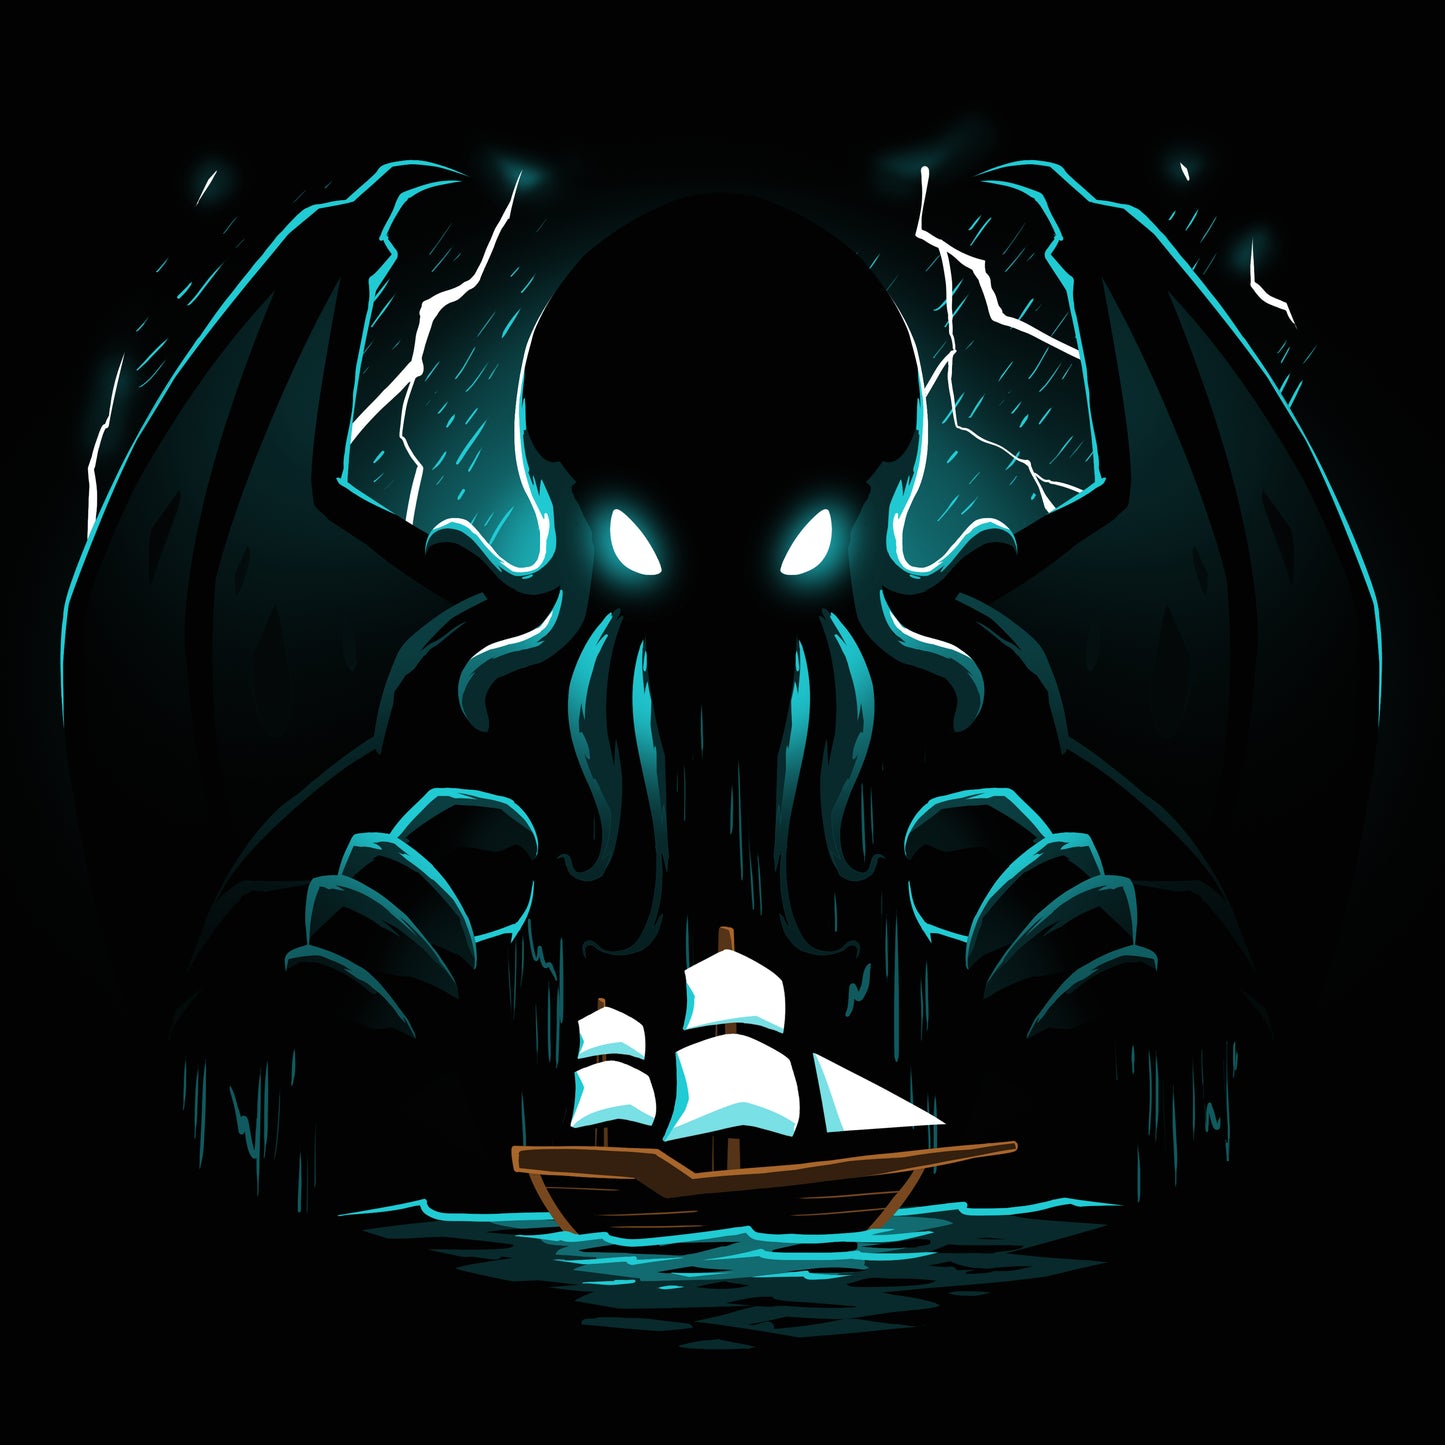 An Epic Cthulhu adventure in a magical place featuring a ship with an octopus brought to you by TeeTurtle.